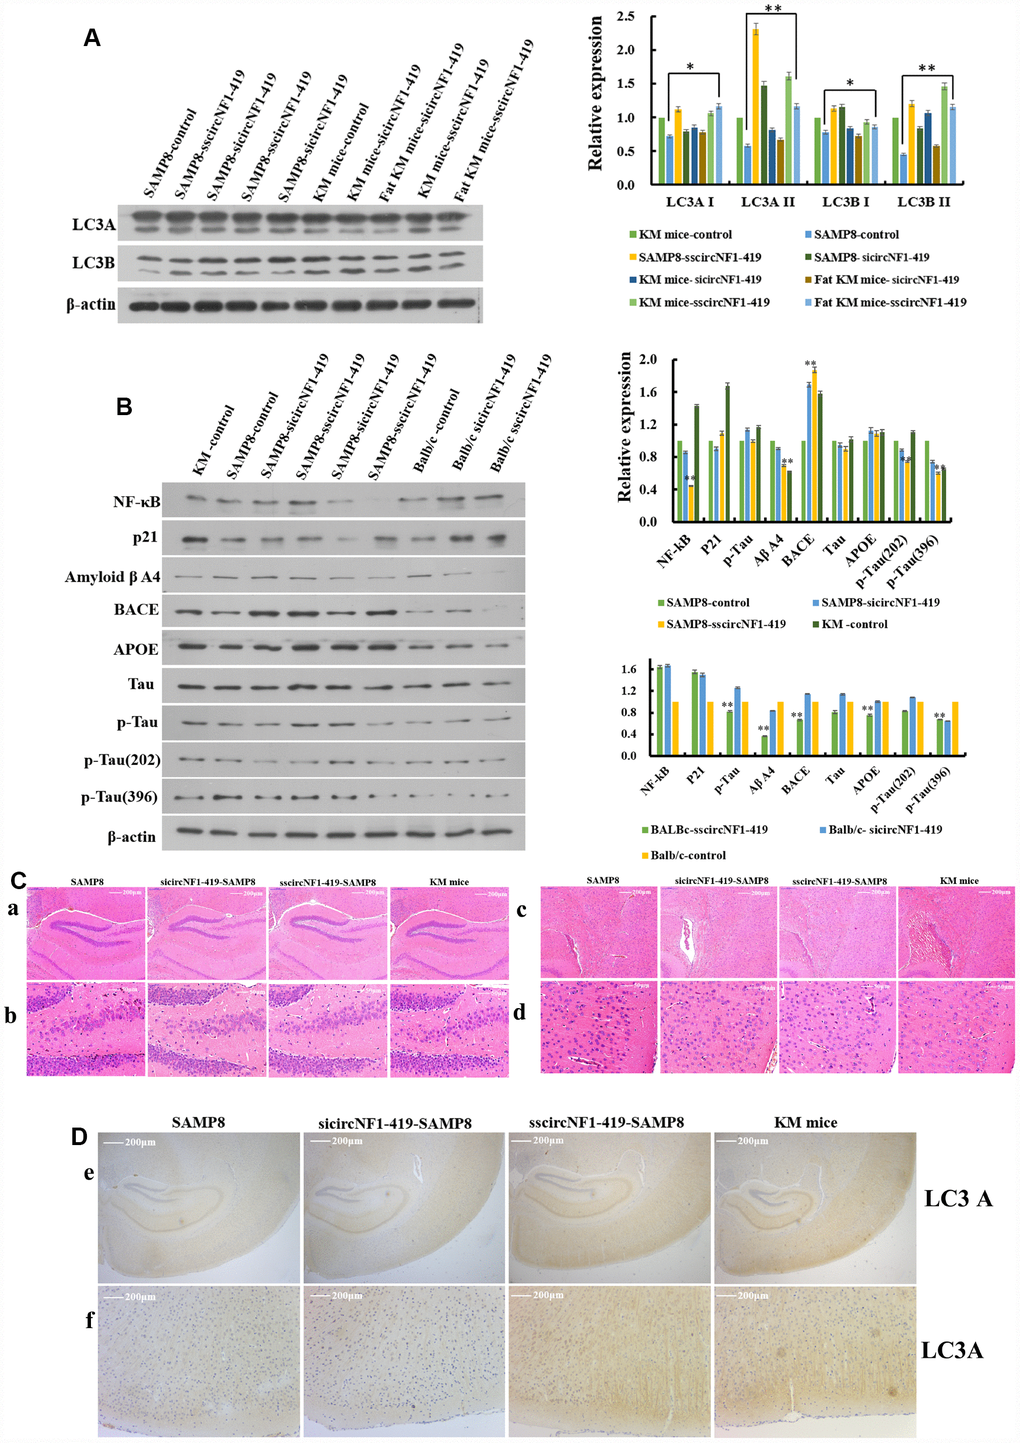 CircNF1-419 delays senile dementia by enhancing autophagy in vivo.CircNF1-419 up-regulates the autophagy biomarkers including LC3A I, LC3A II, LC3B I and LC3B II (A), and improves the AD related regulators including p-Tau, p-Tau (202), p-Tau (396), Aβ A4, APOE, BACE1, TNF-α, NF-κB and p21 (B); histopathological (C) examination of hippocampus (Ca-b) and cortex (Cc-d); and immunostaining examination (D) of LC3A in hippocampus (De) and cortex (Df). All densitometric data of proteins expression using ImageJ are presented as the means±SD of 3 independent experiments. **p vs. the model group by one-way ANOVA, followed by the Holm-Sidak test.